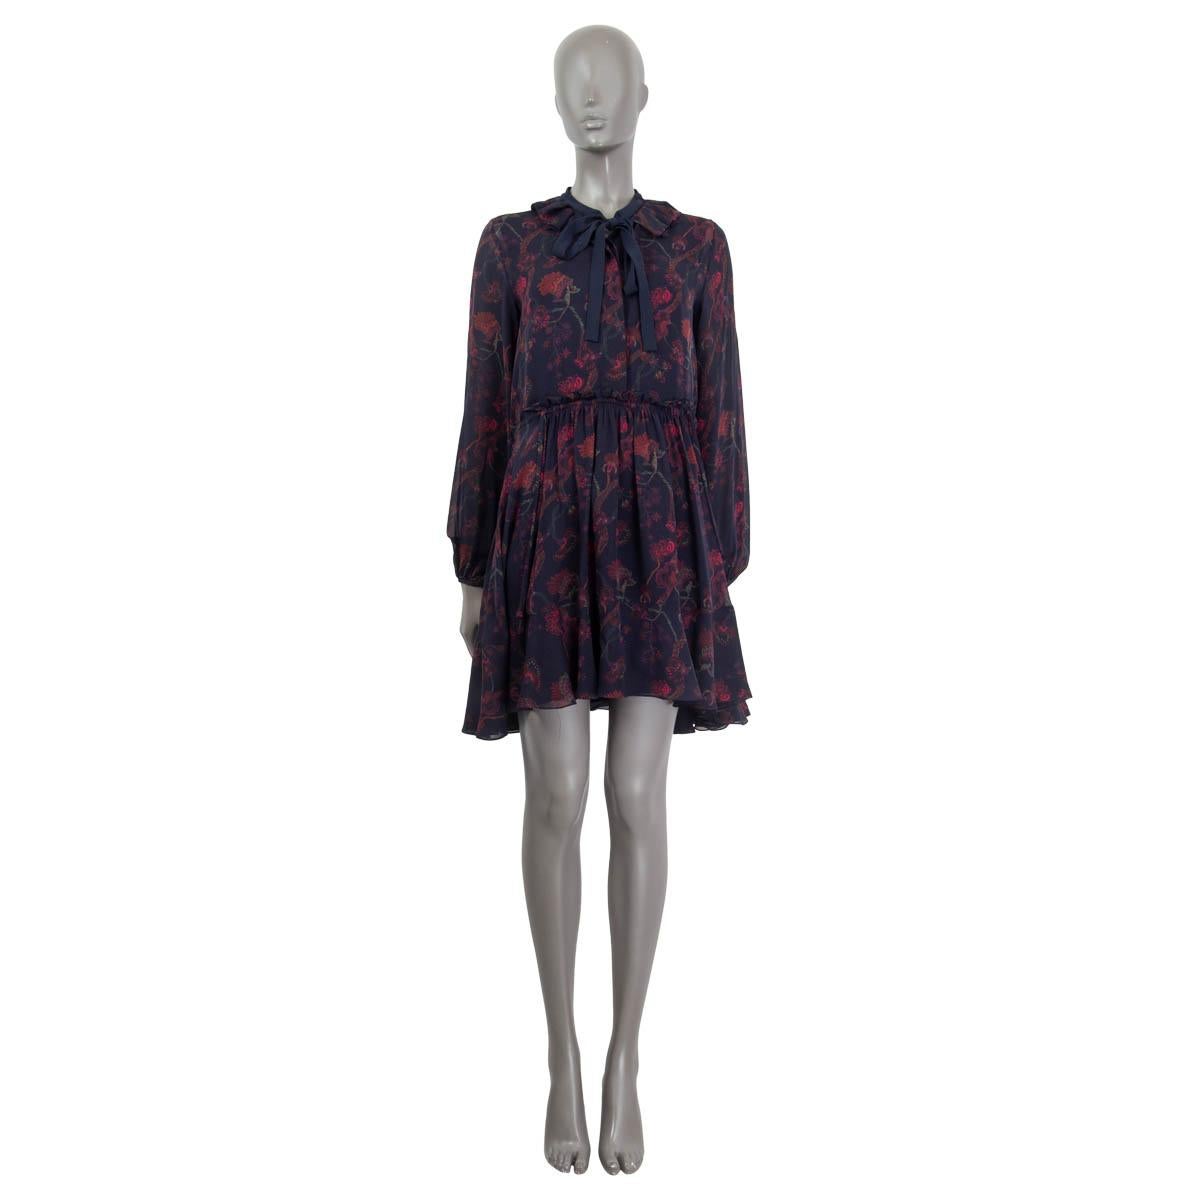 100% authentic Chloé long sleeve floral dress in navy, red, burgundy and green silk georgette (100%). Features a self-tie bow, buttoned cuffs and drawstring closure at the waist. Opens with  four concealed buttons on the front. Lined in navy silk